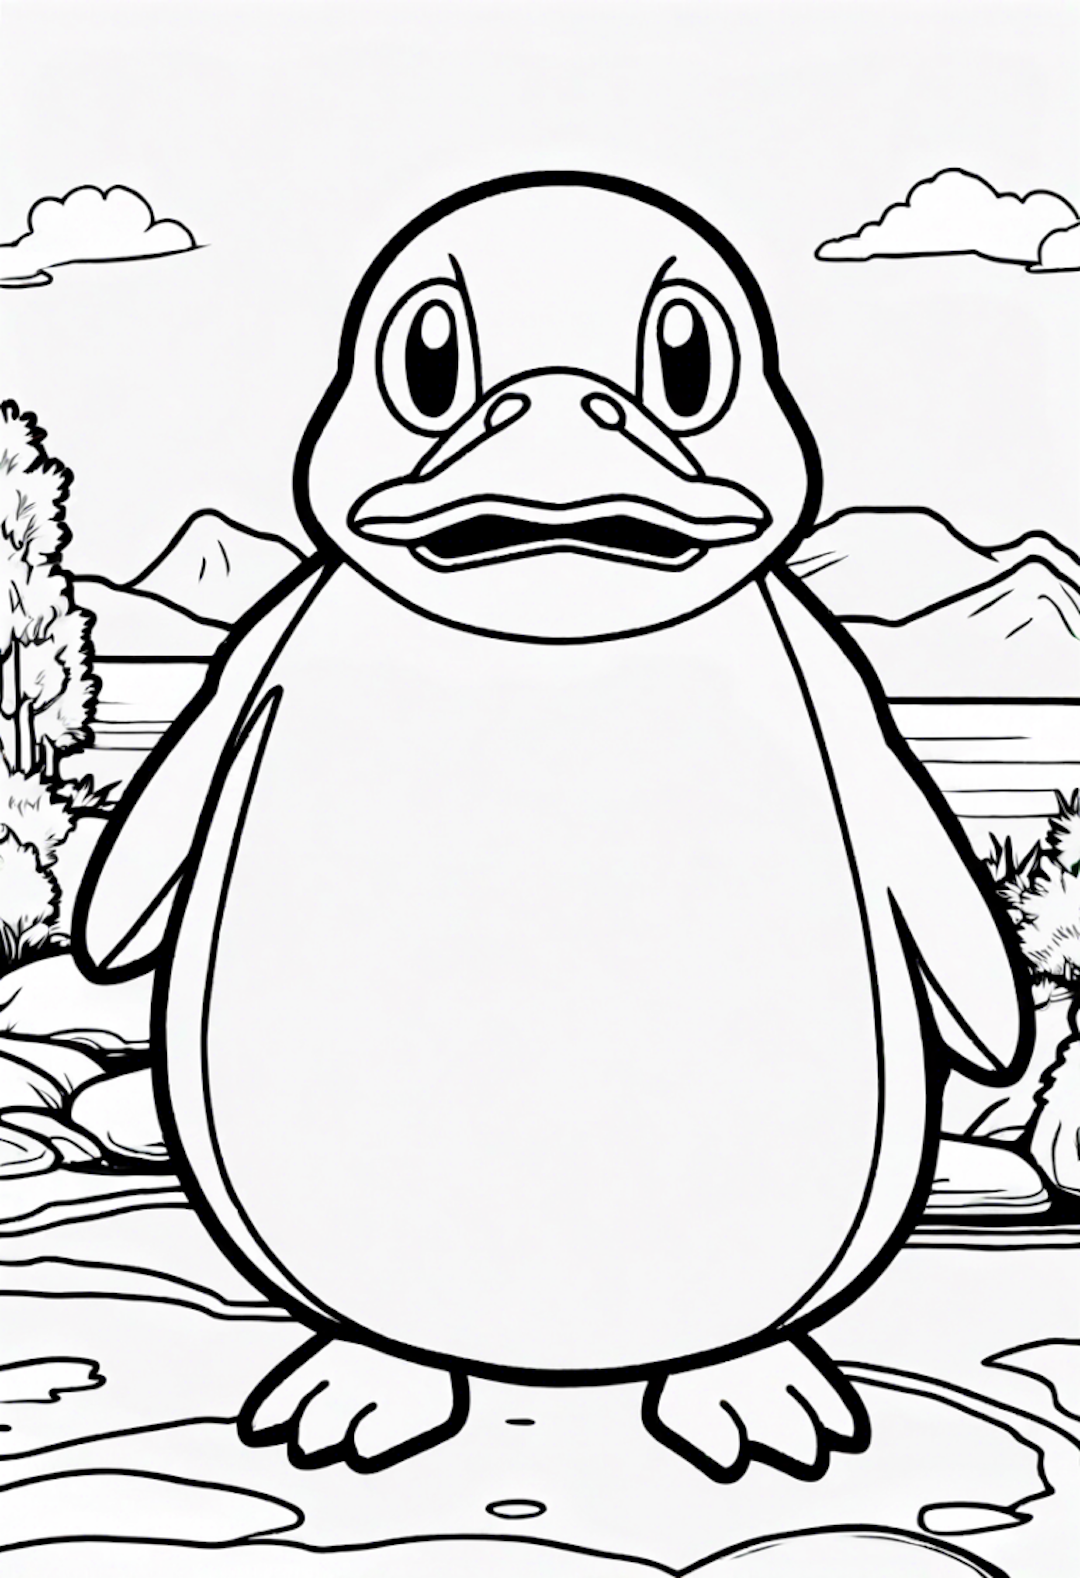 Psyduck by the Lake Coloring Page coloring pages